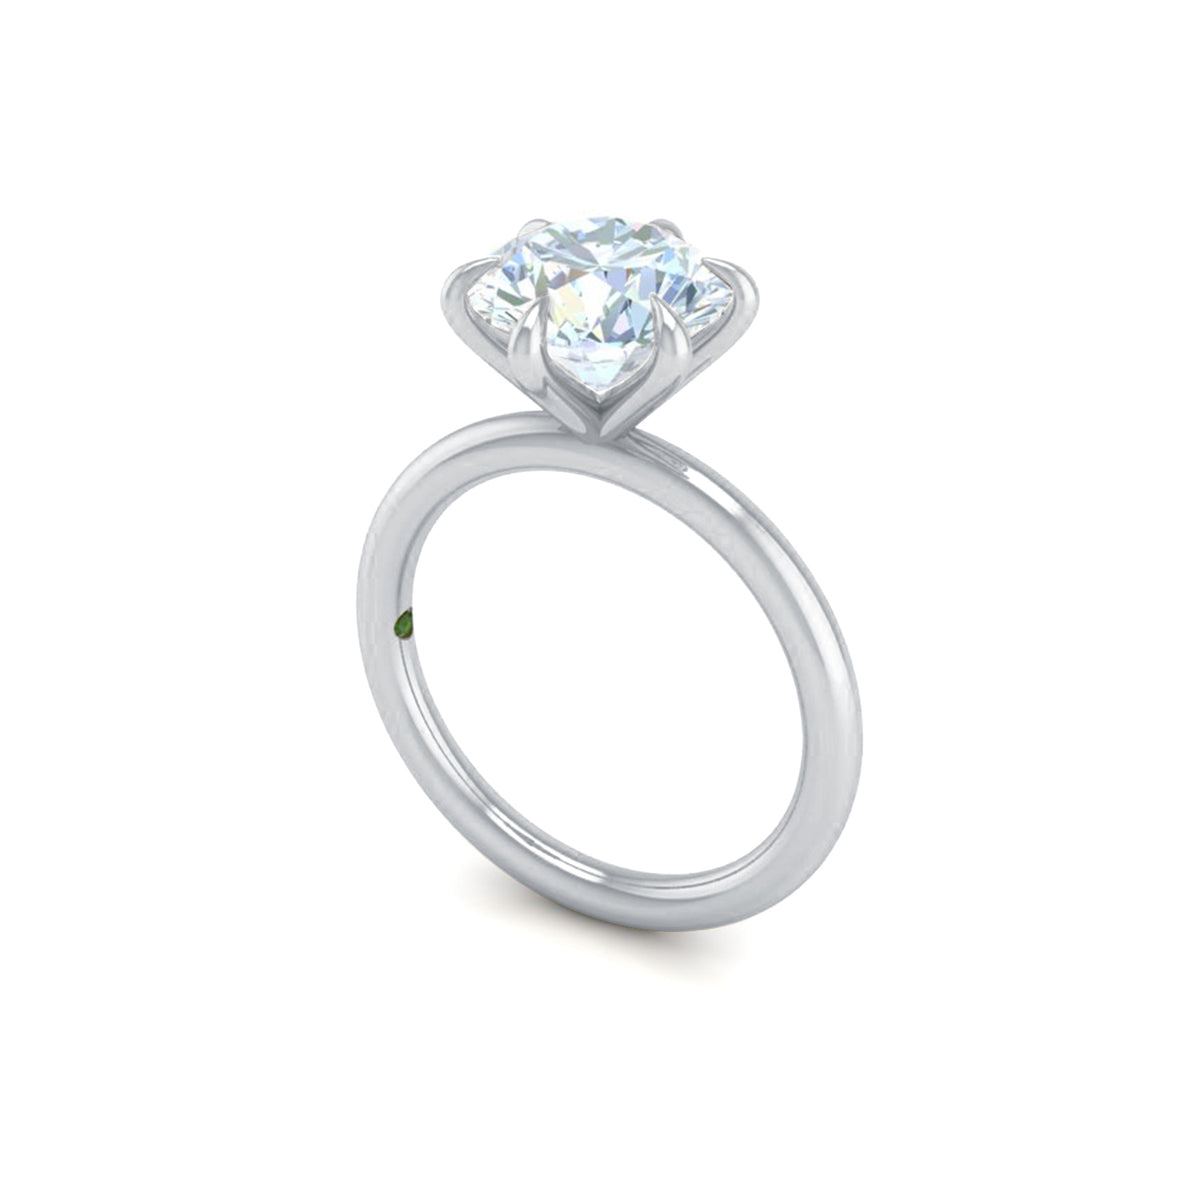 Solstice Engagement Ring